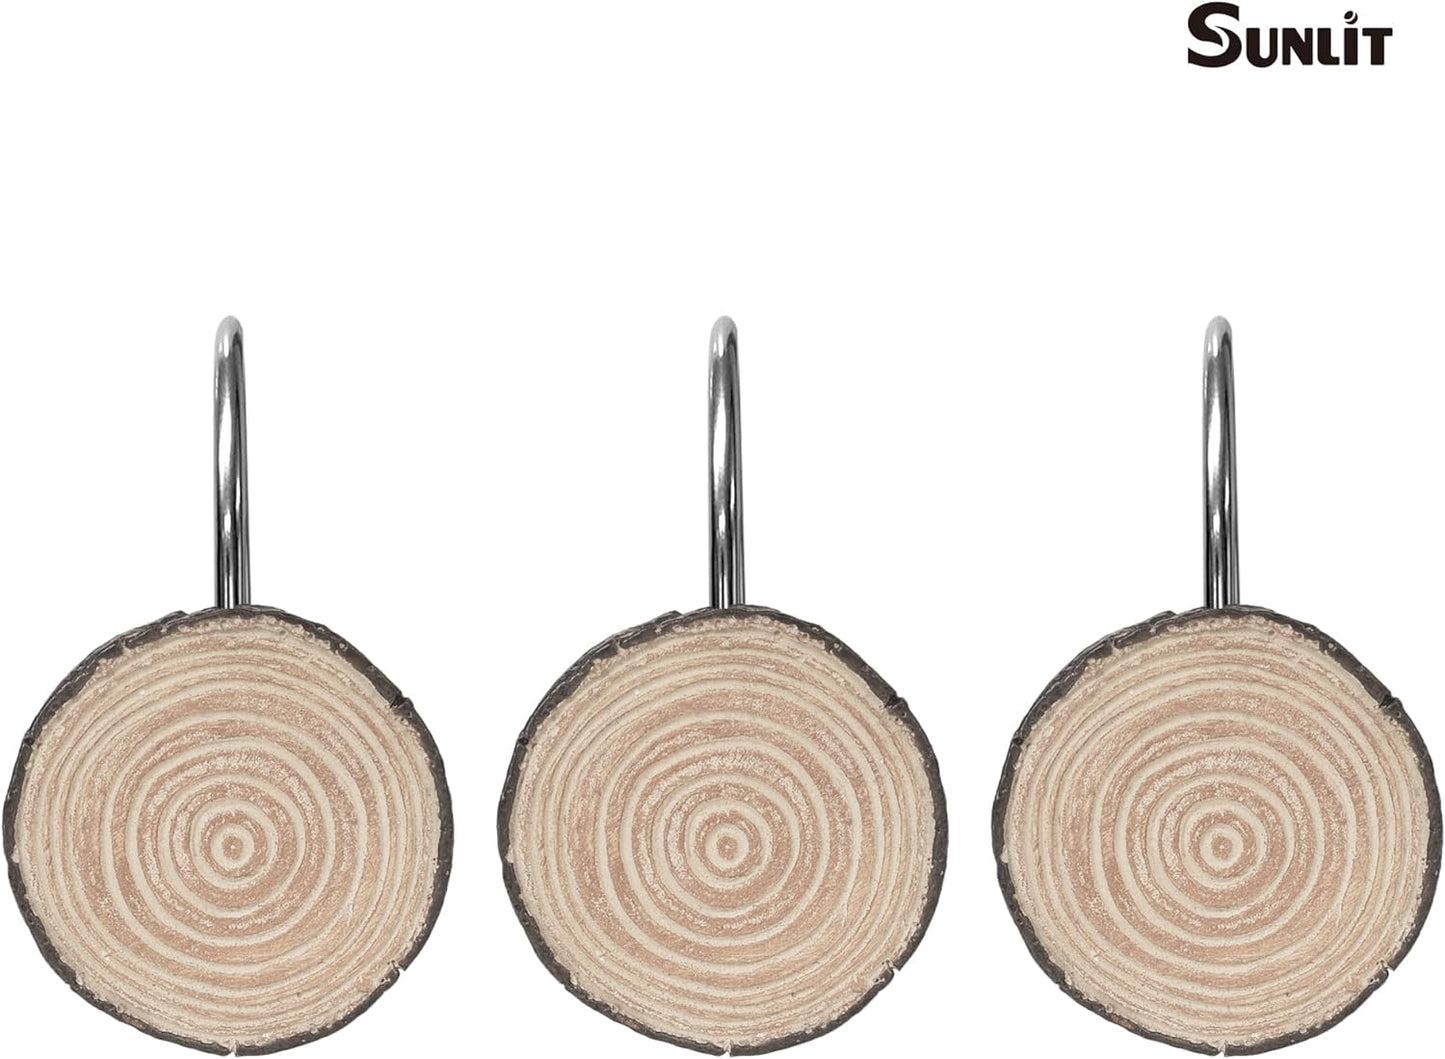 Sunlit Farmhouse Wooden Slices Shower Curtain Hooks, Rustic Home Decorative Shower Curtain Rings for Bathroom, Resin Shower Curtain Hangers Bathroom Accessories, Set of 12